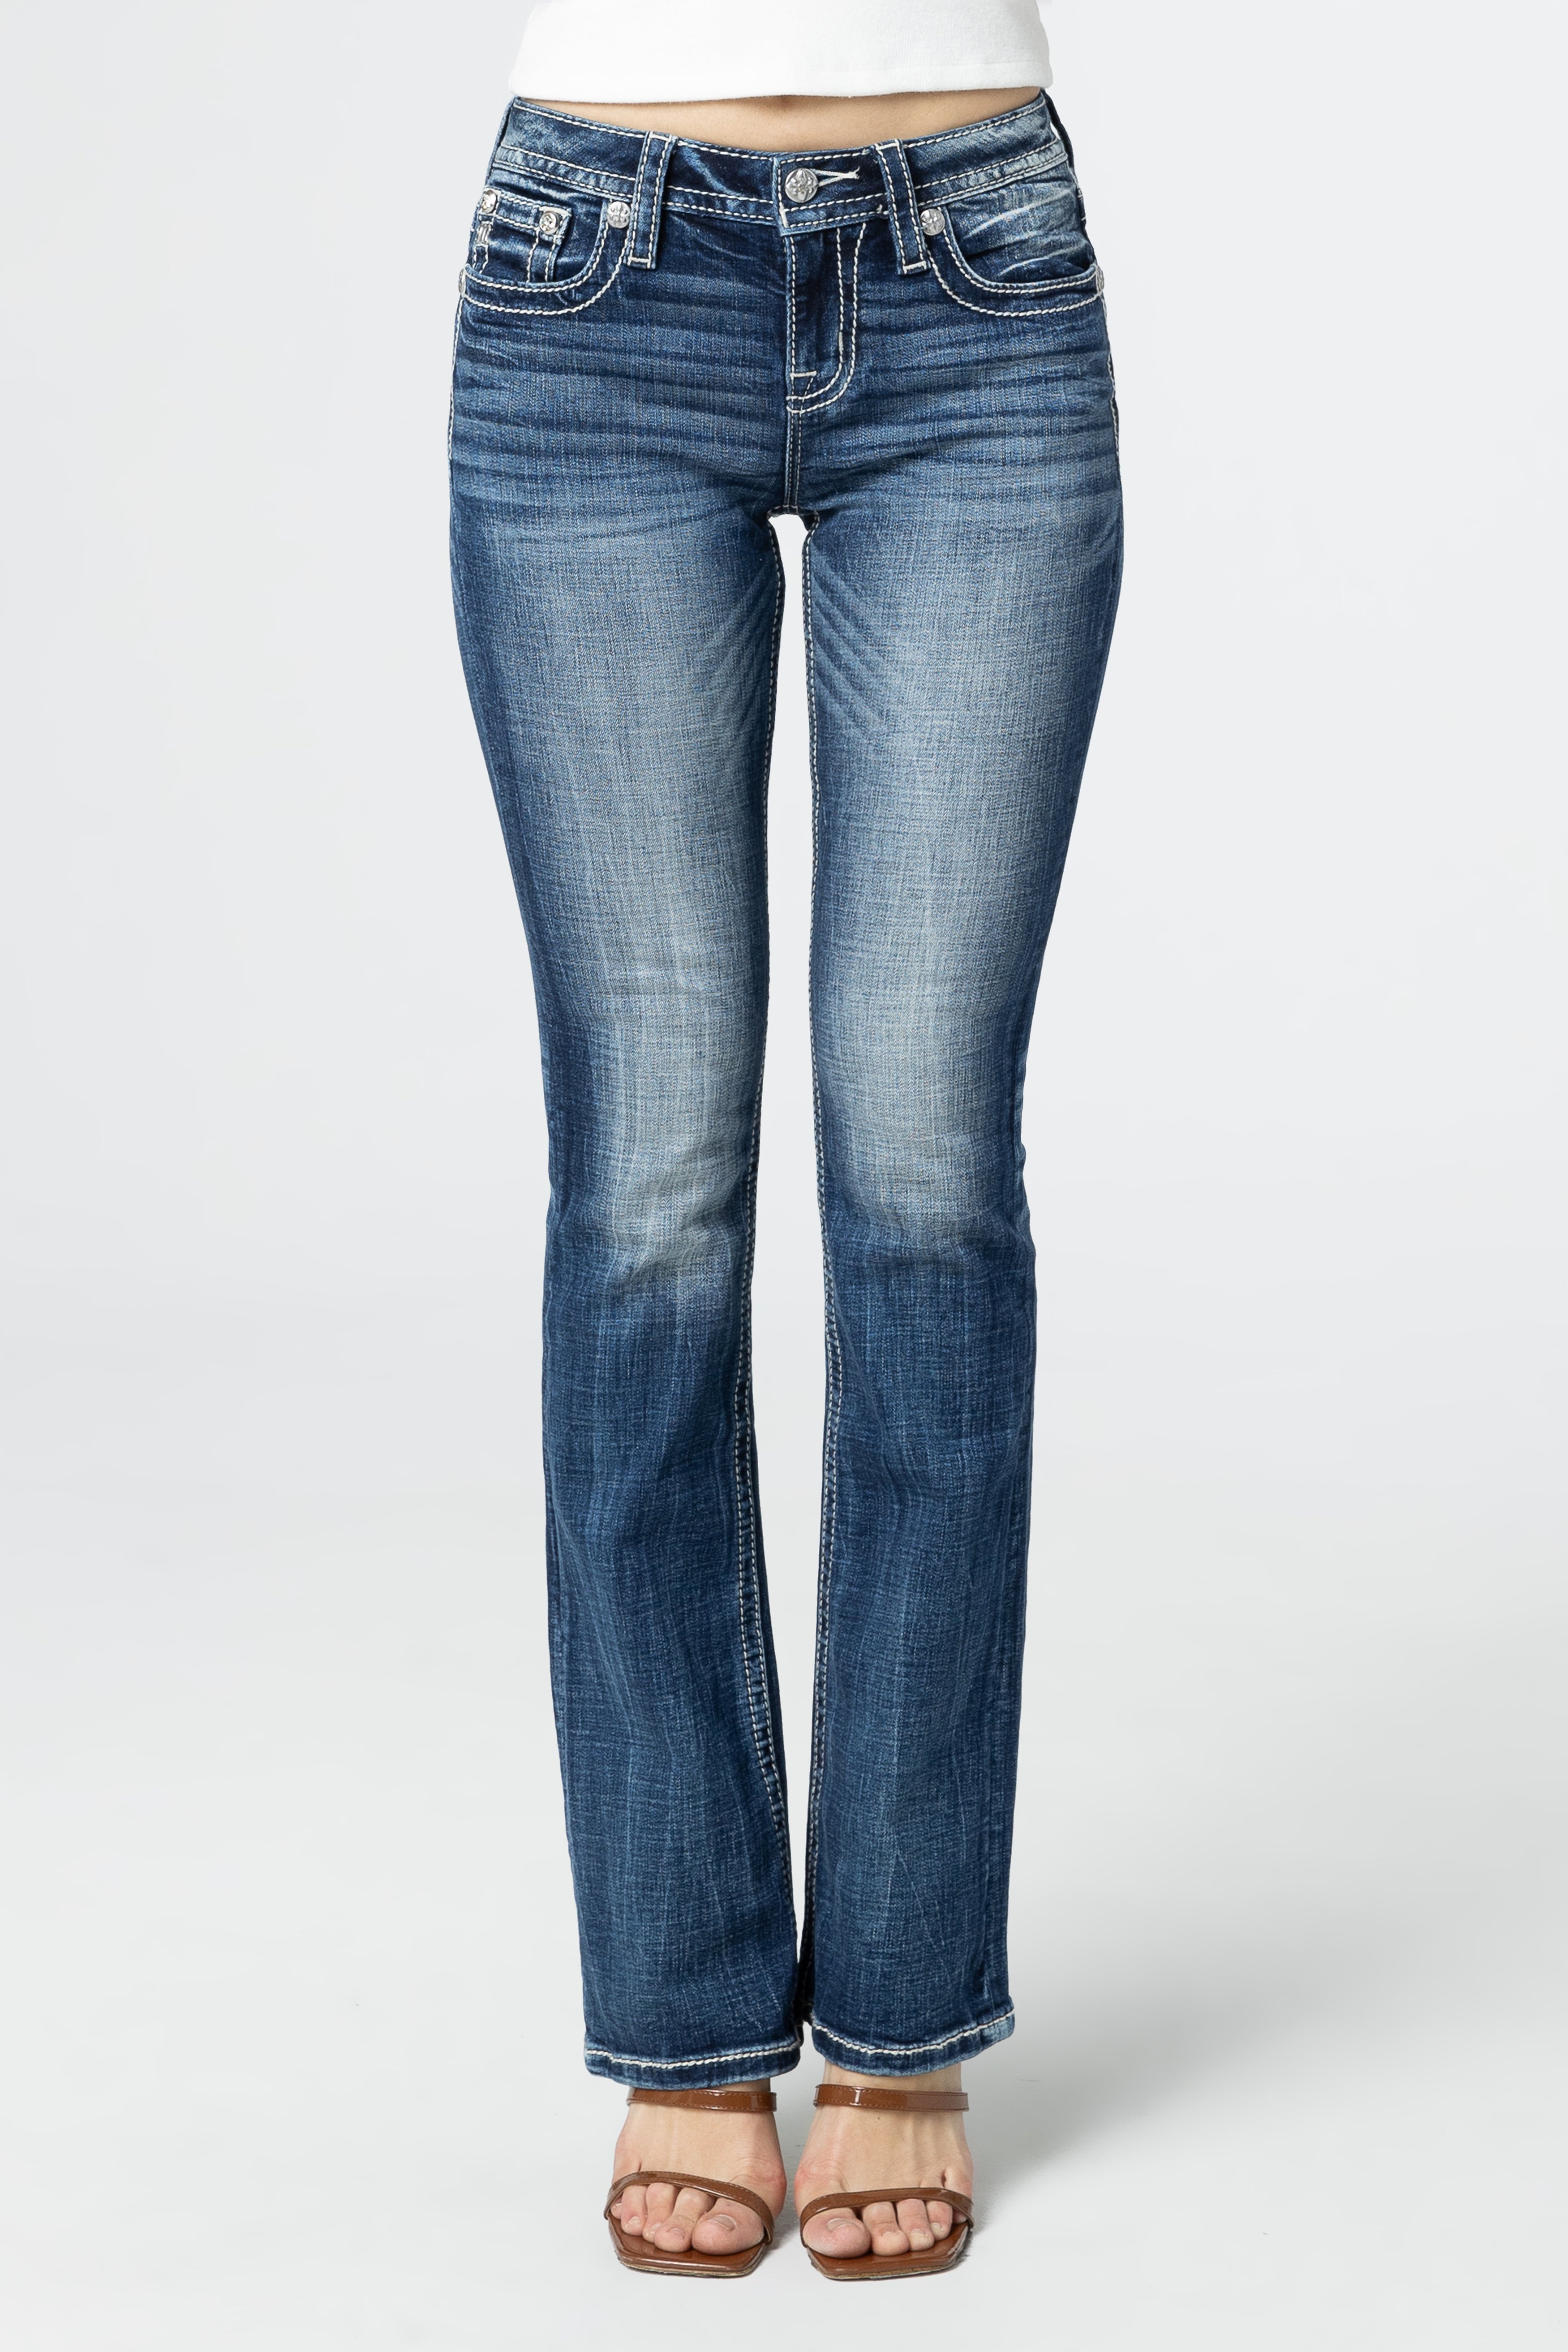 Aztec Embroidered Cross Bootcut Jeans, Only $119.00